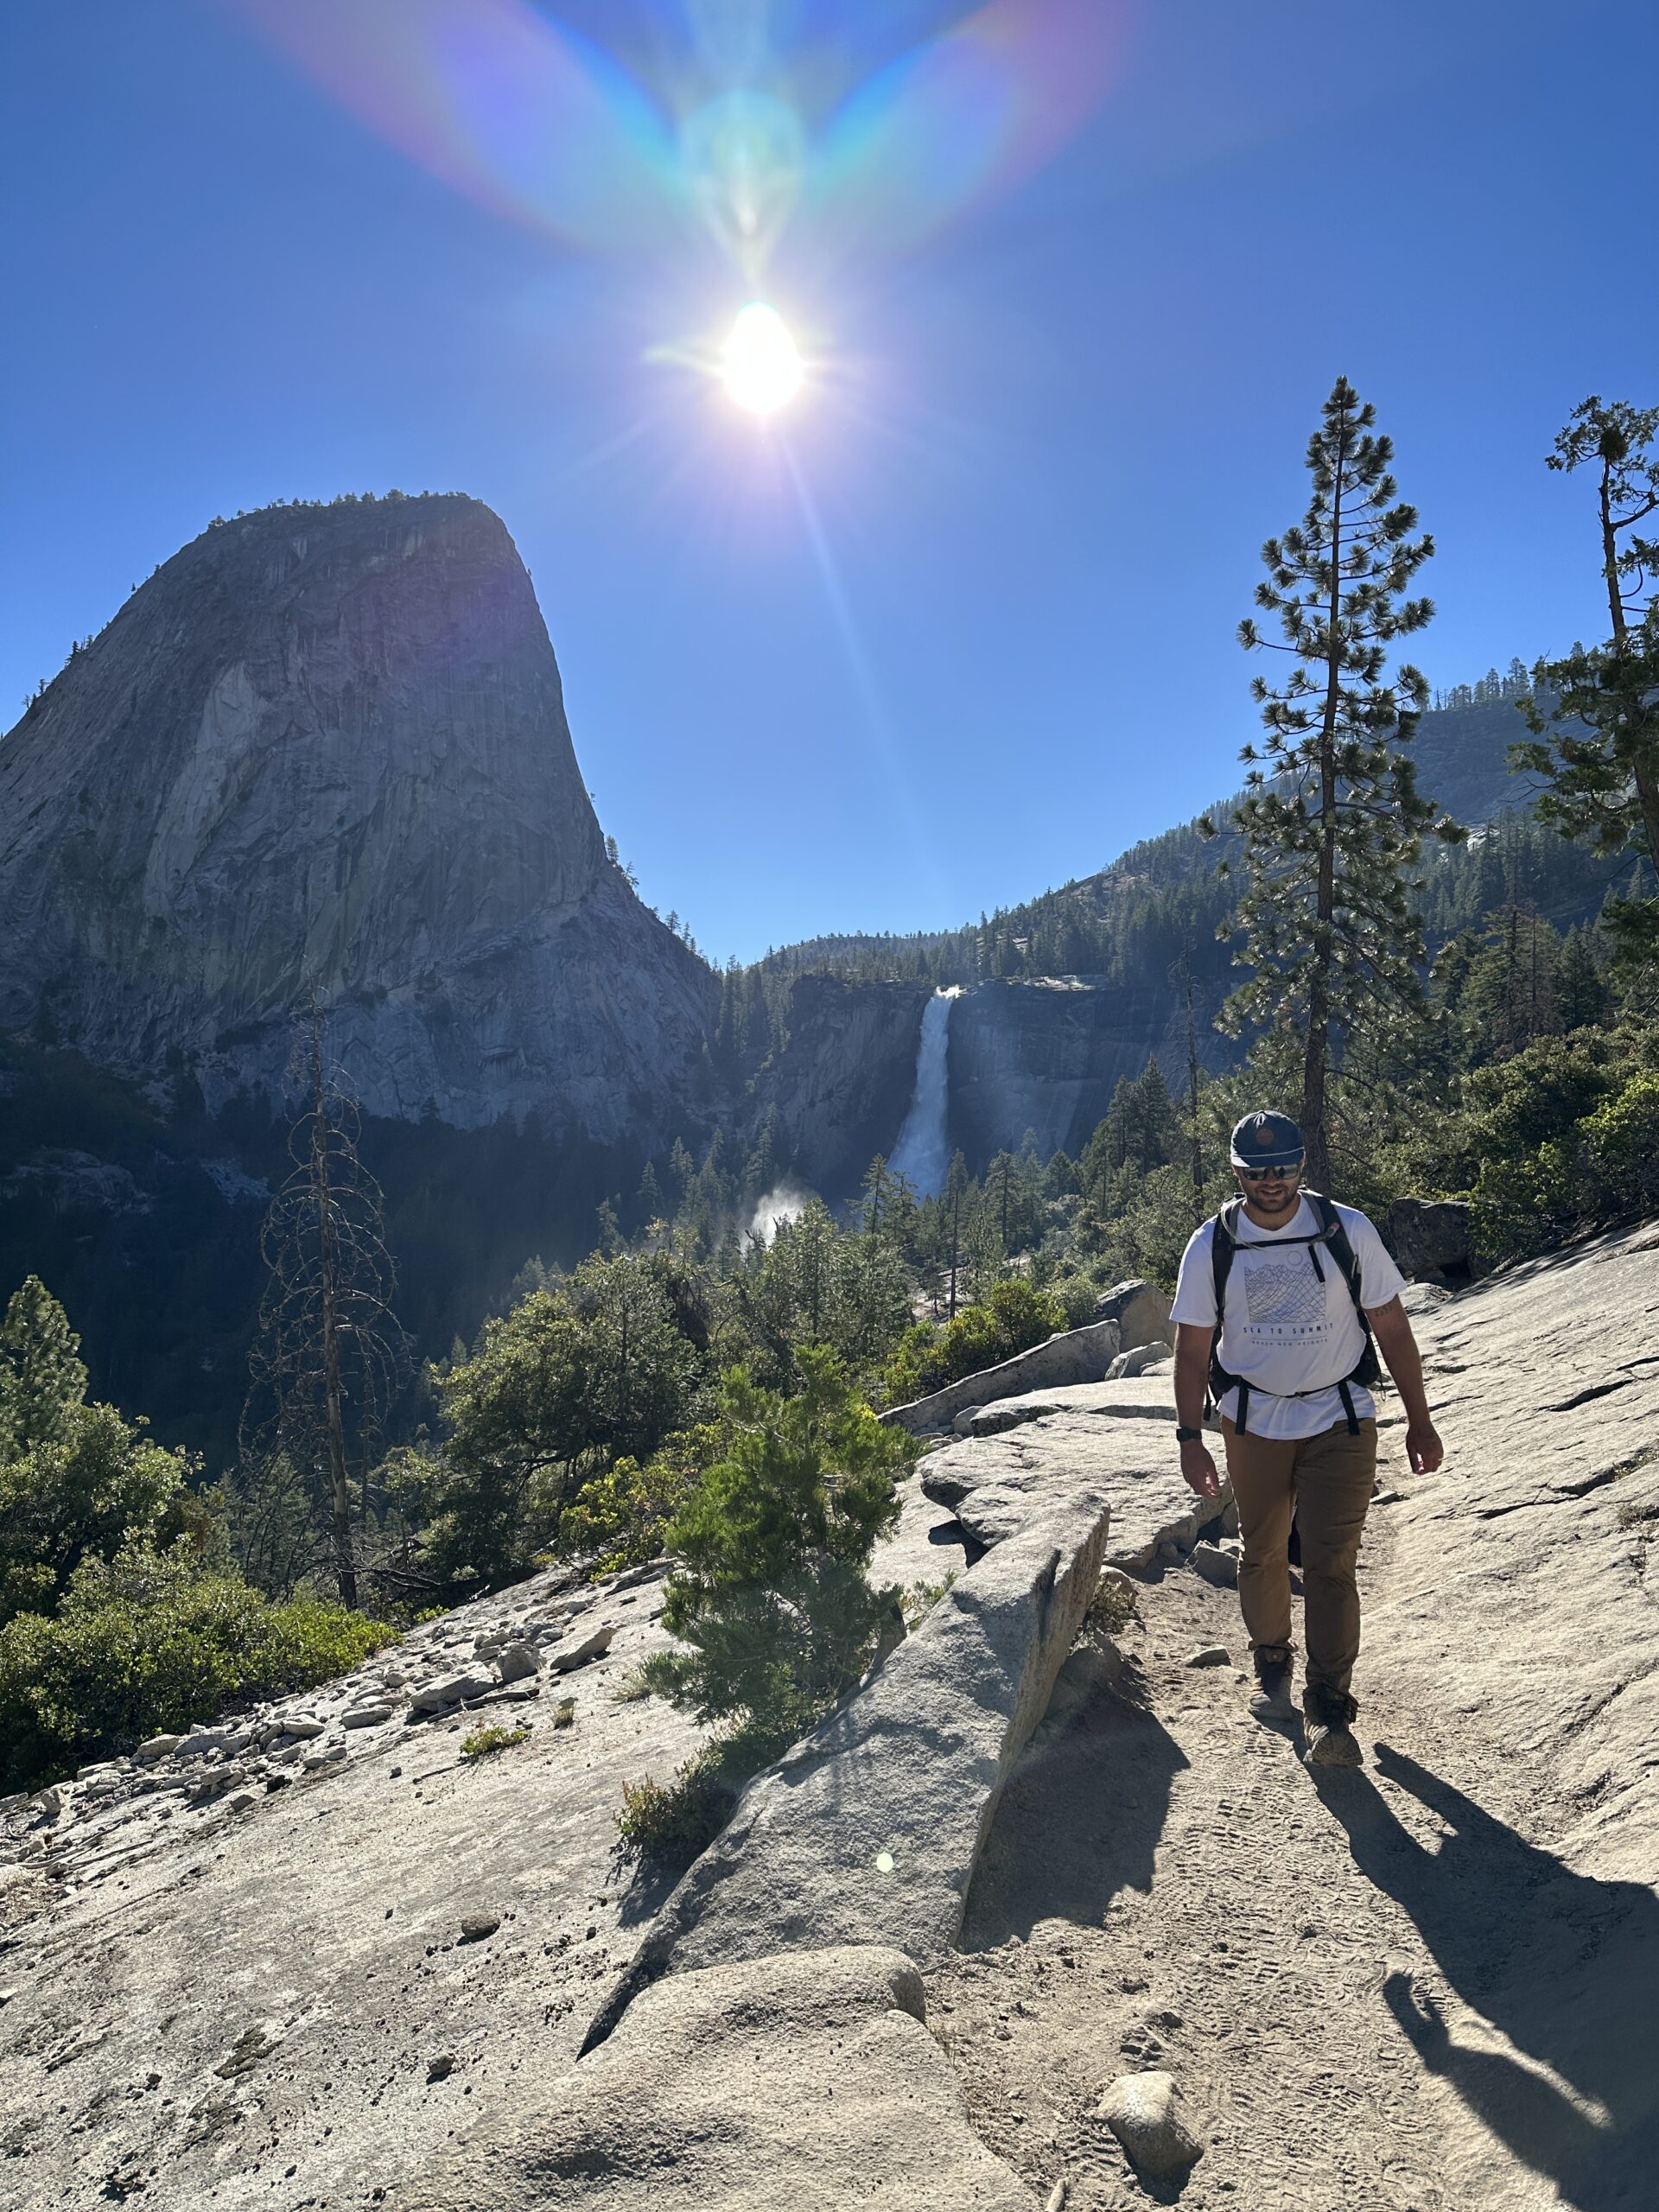 mist trail one of the best hikes in yosemite national park